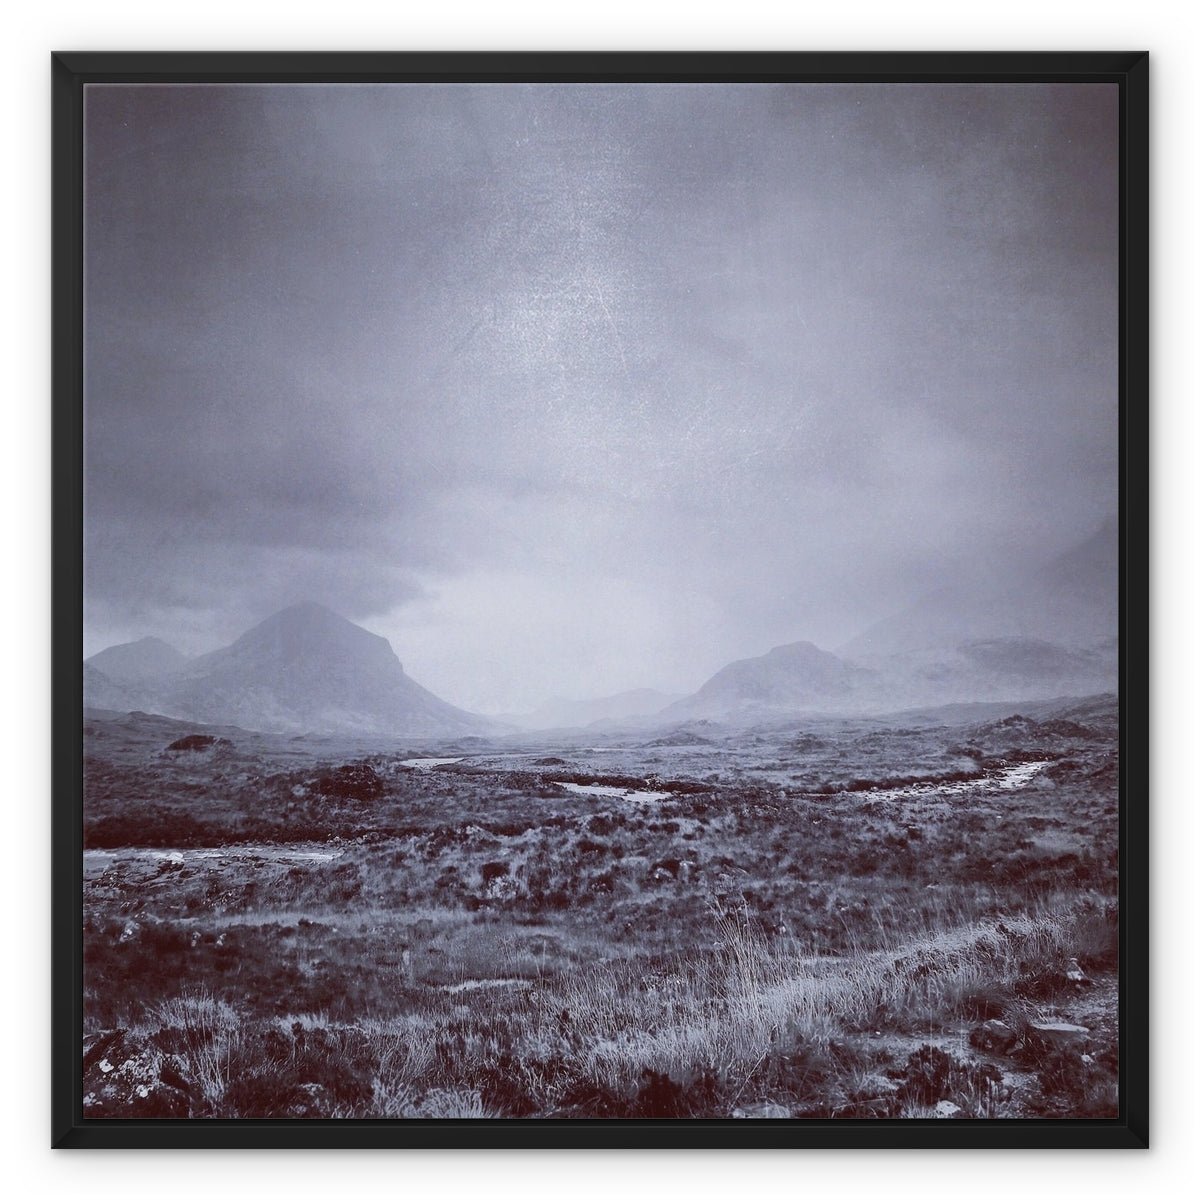 The Brooding Cuillin Skye Painting | Framed Canvas From Scotland-Floating Framed Canvas Prints-Skye Art Gallery-24"x24"-Black Frame-Paintings, Prints, Homeware, Art Gifts From Scotland By Scottish Artist Kevin Hunter